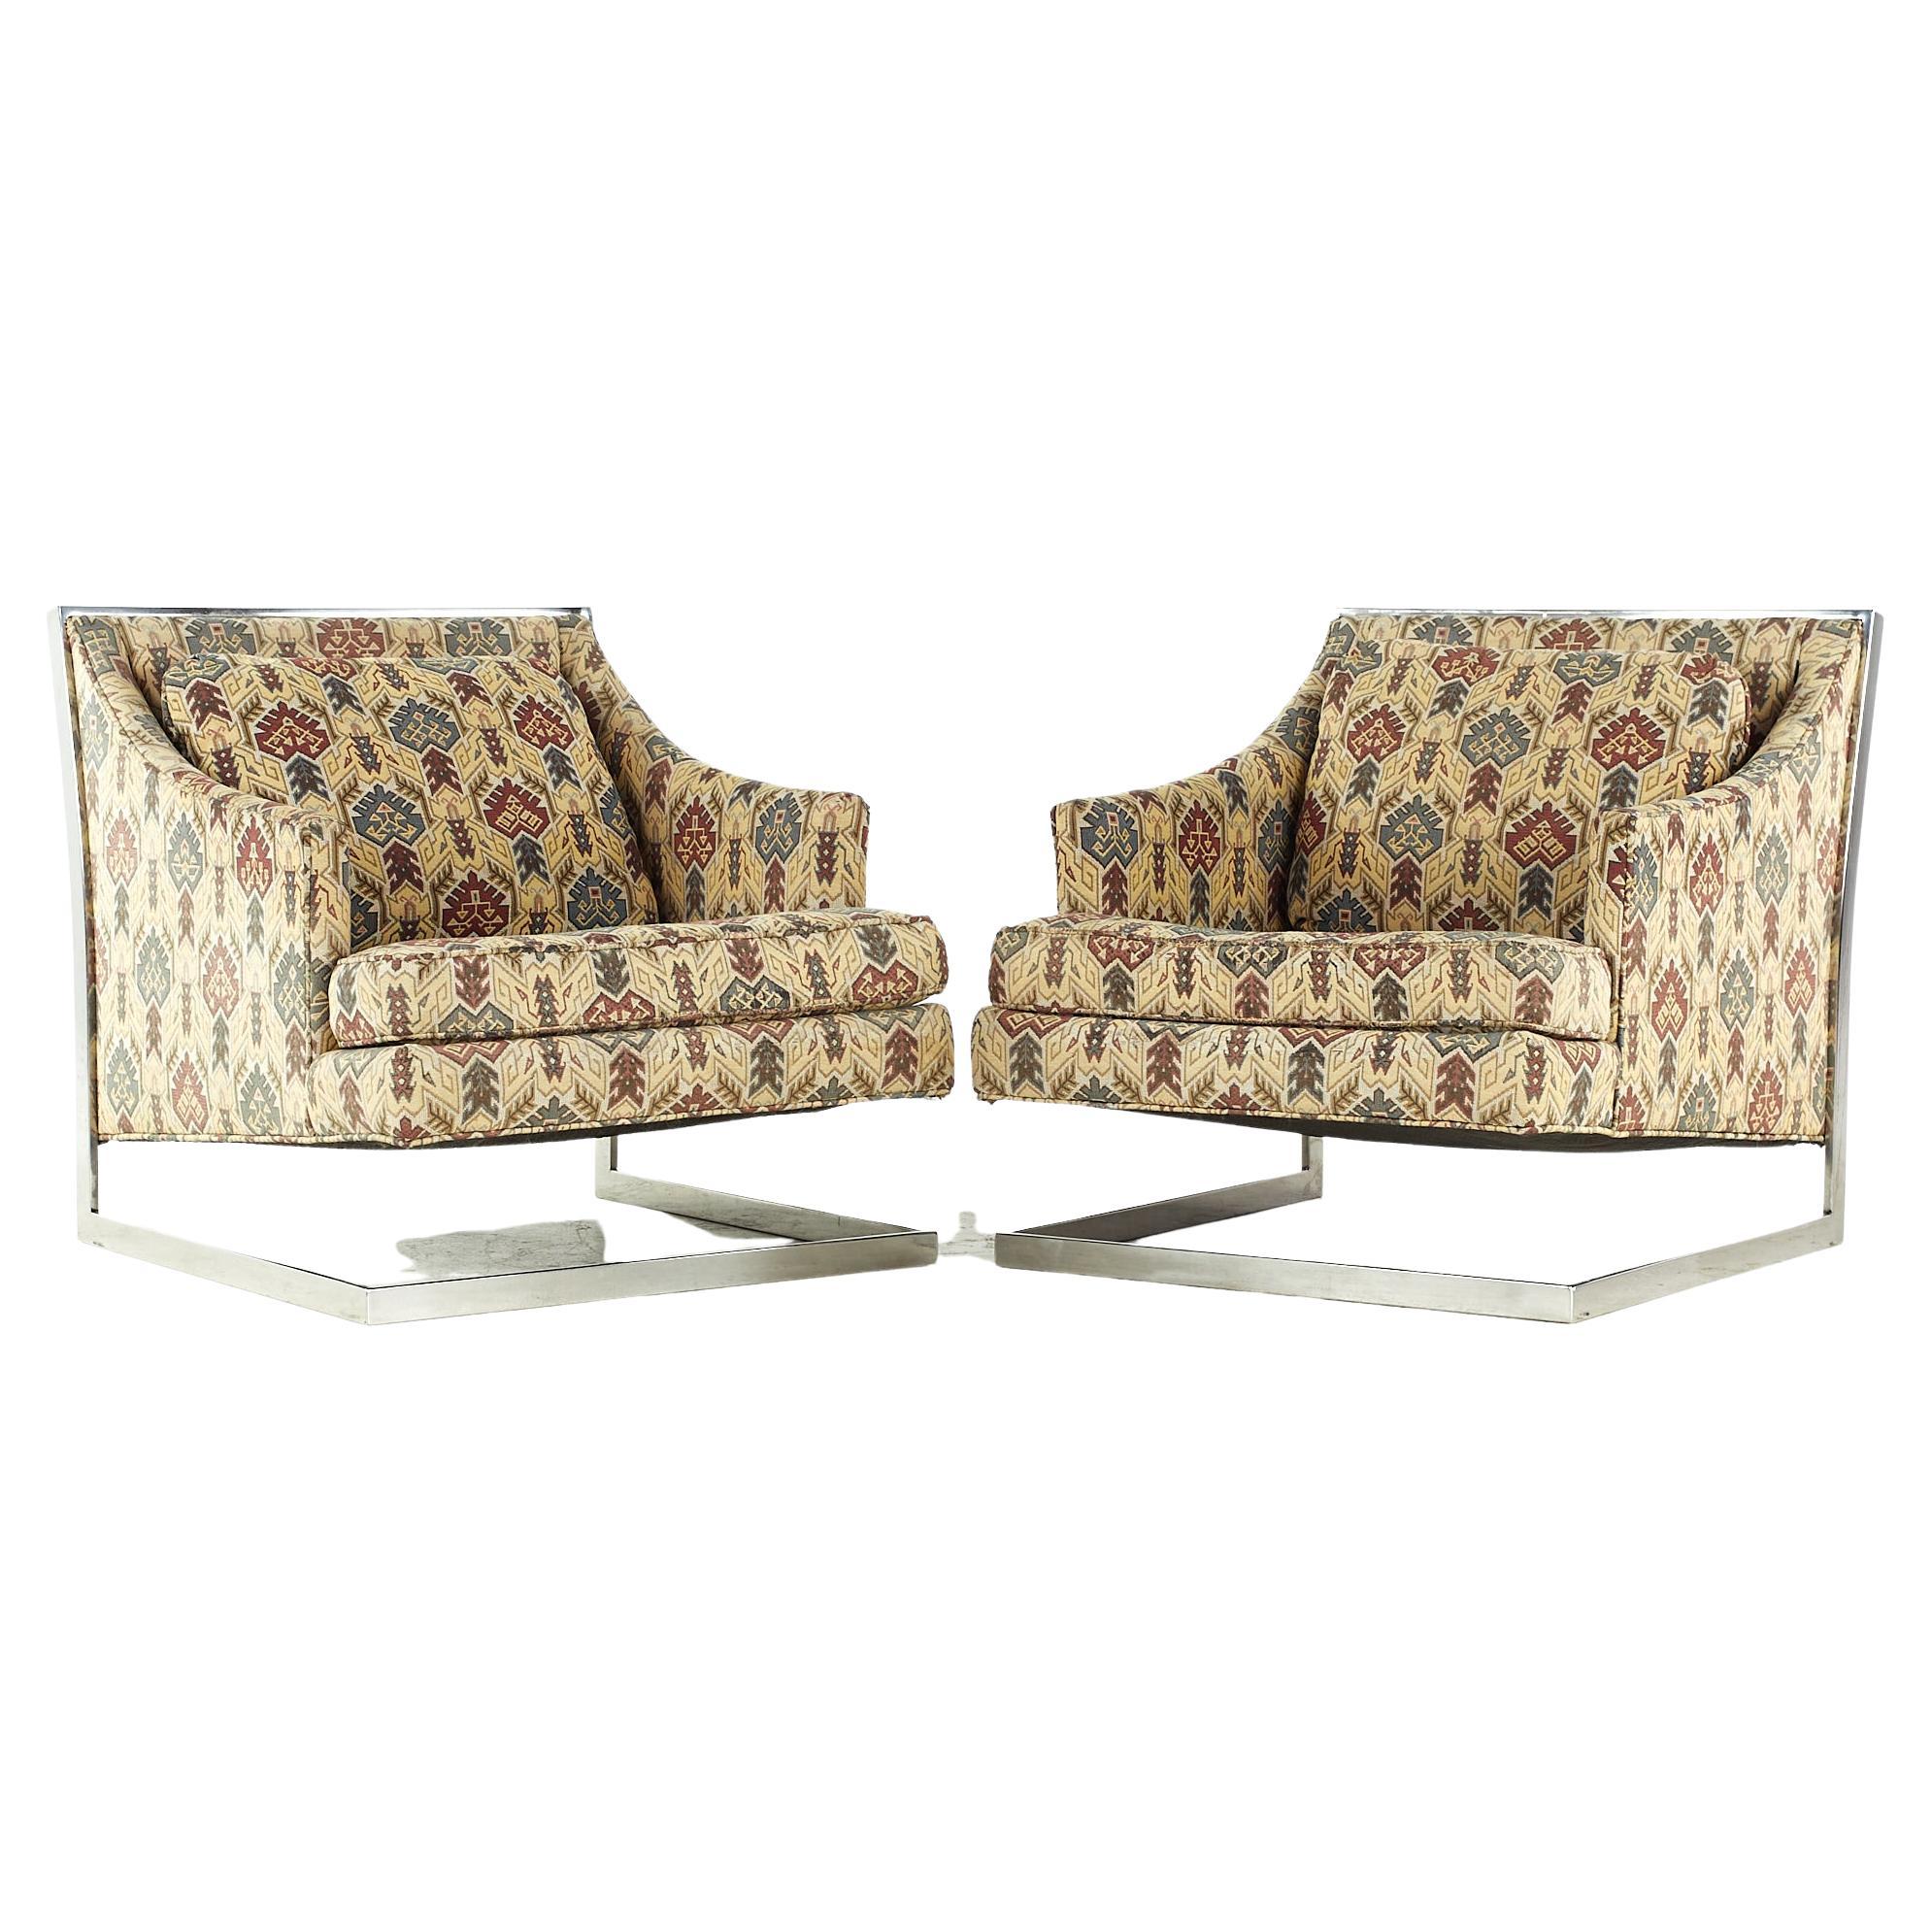 Milo Baughman Style Midcentury Chrome Cantilever Lounge Chairs, Pair